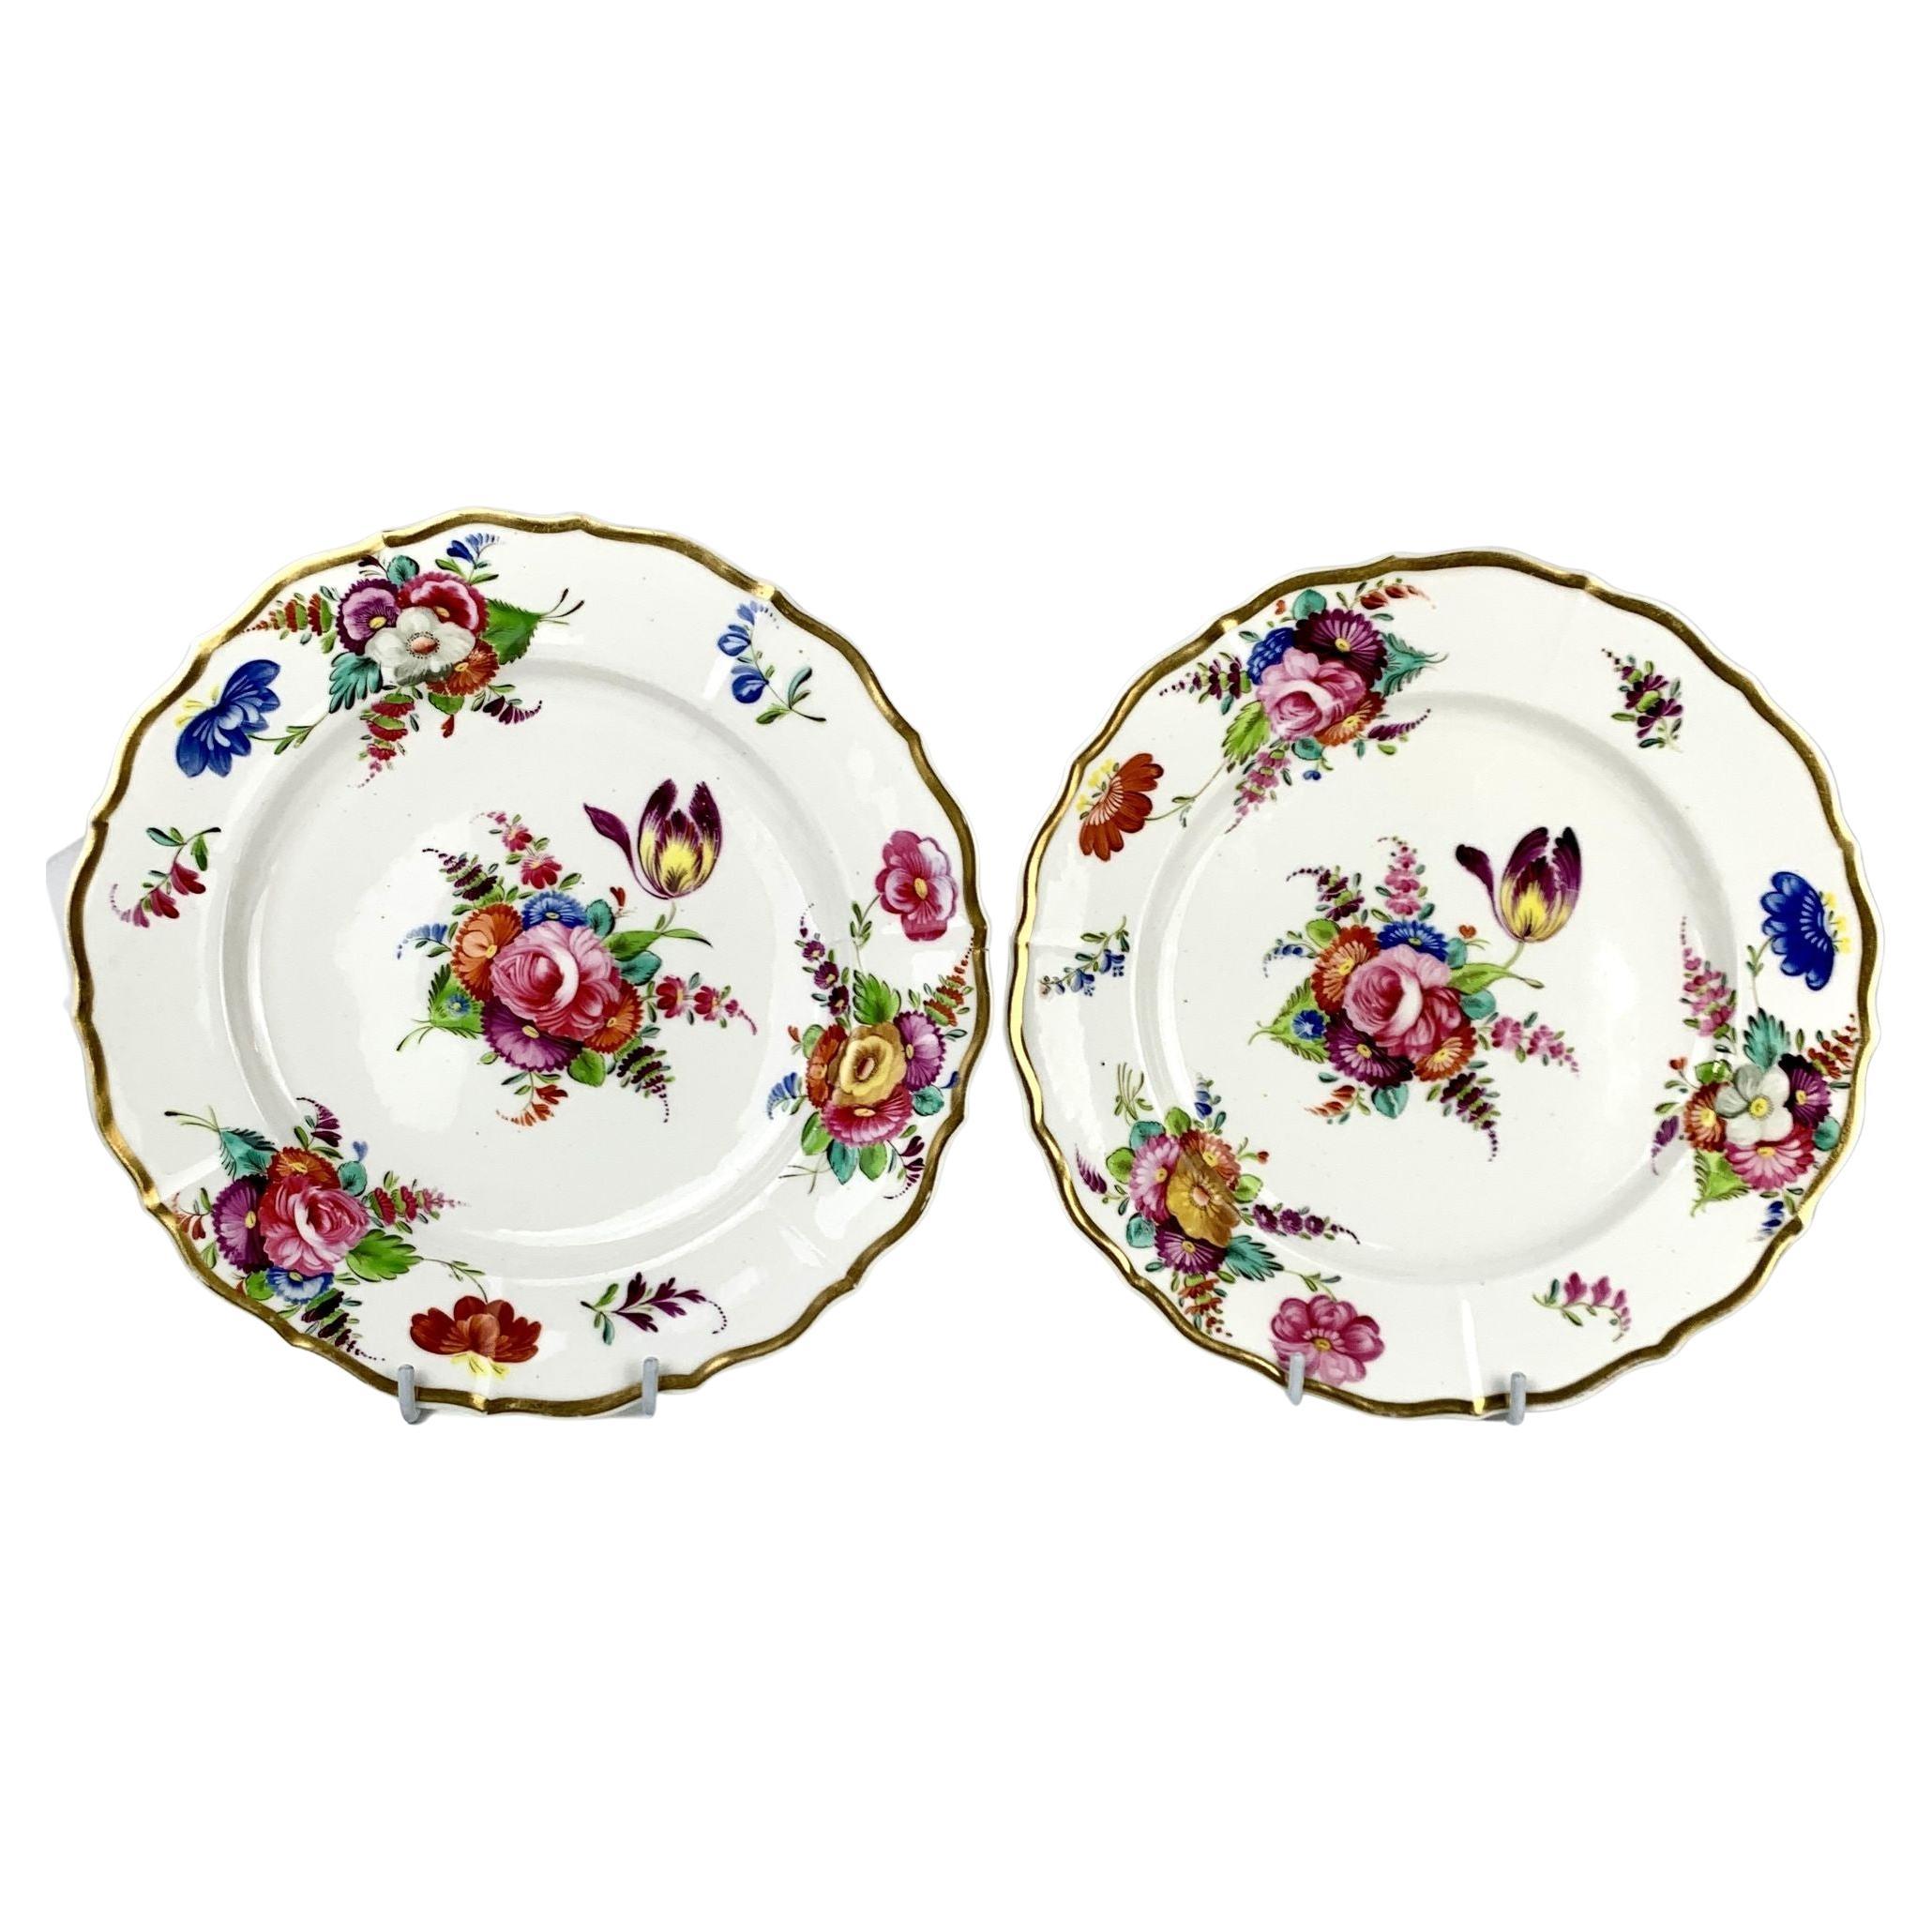 Pair Antique English Porcelain Dishes Made by Coalport, Circa 1825 For Sale